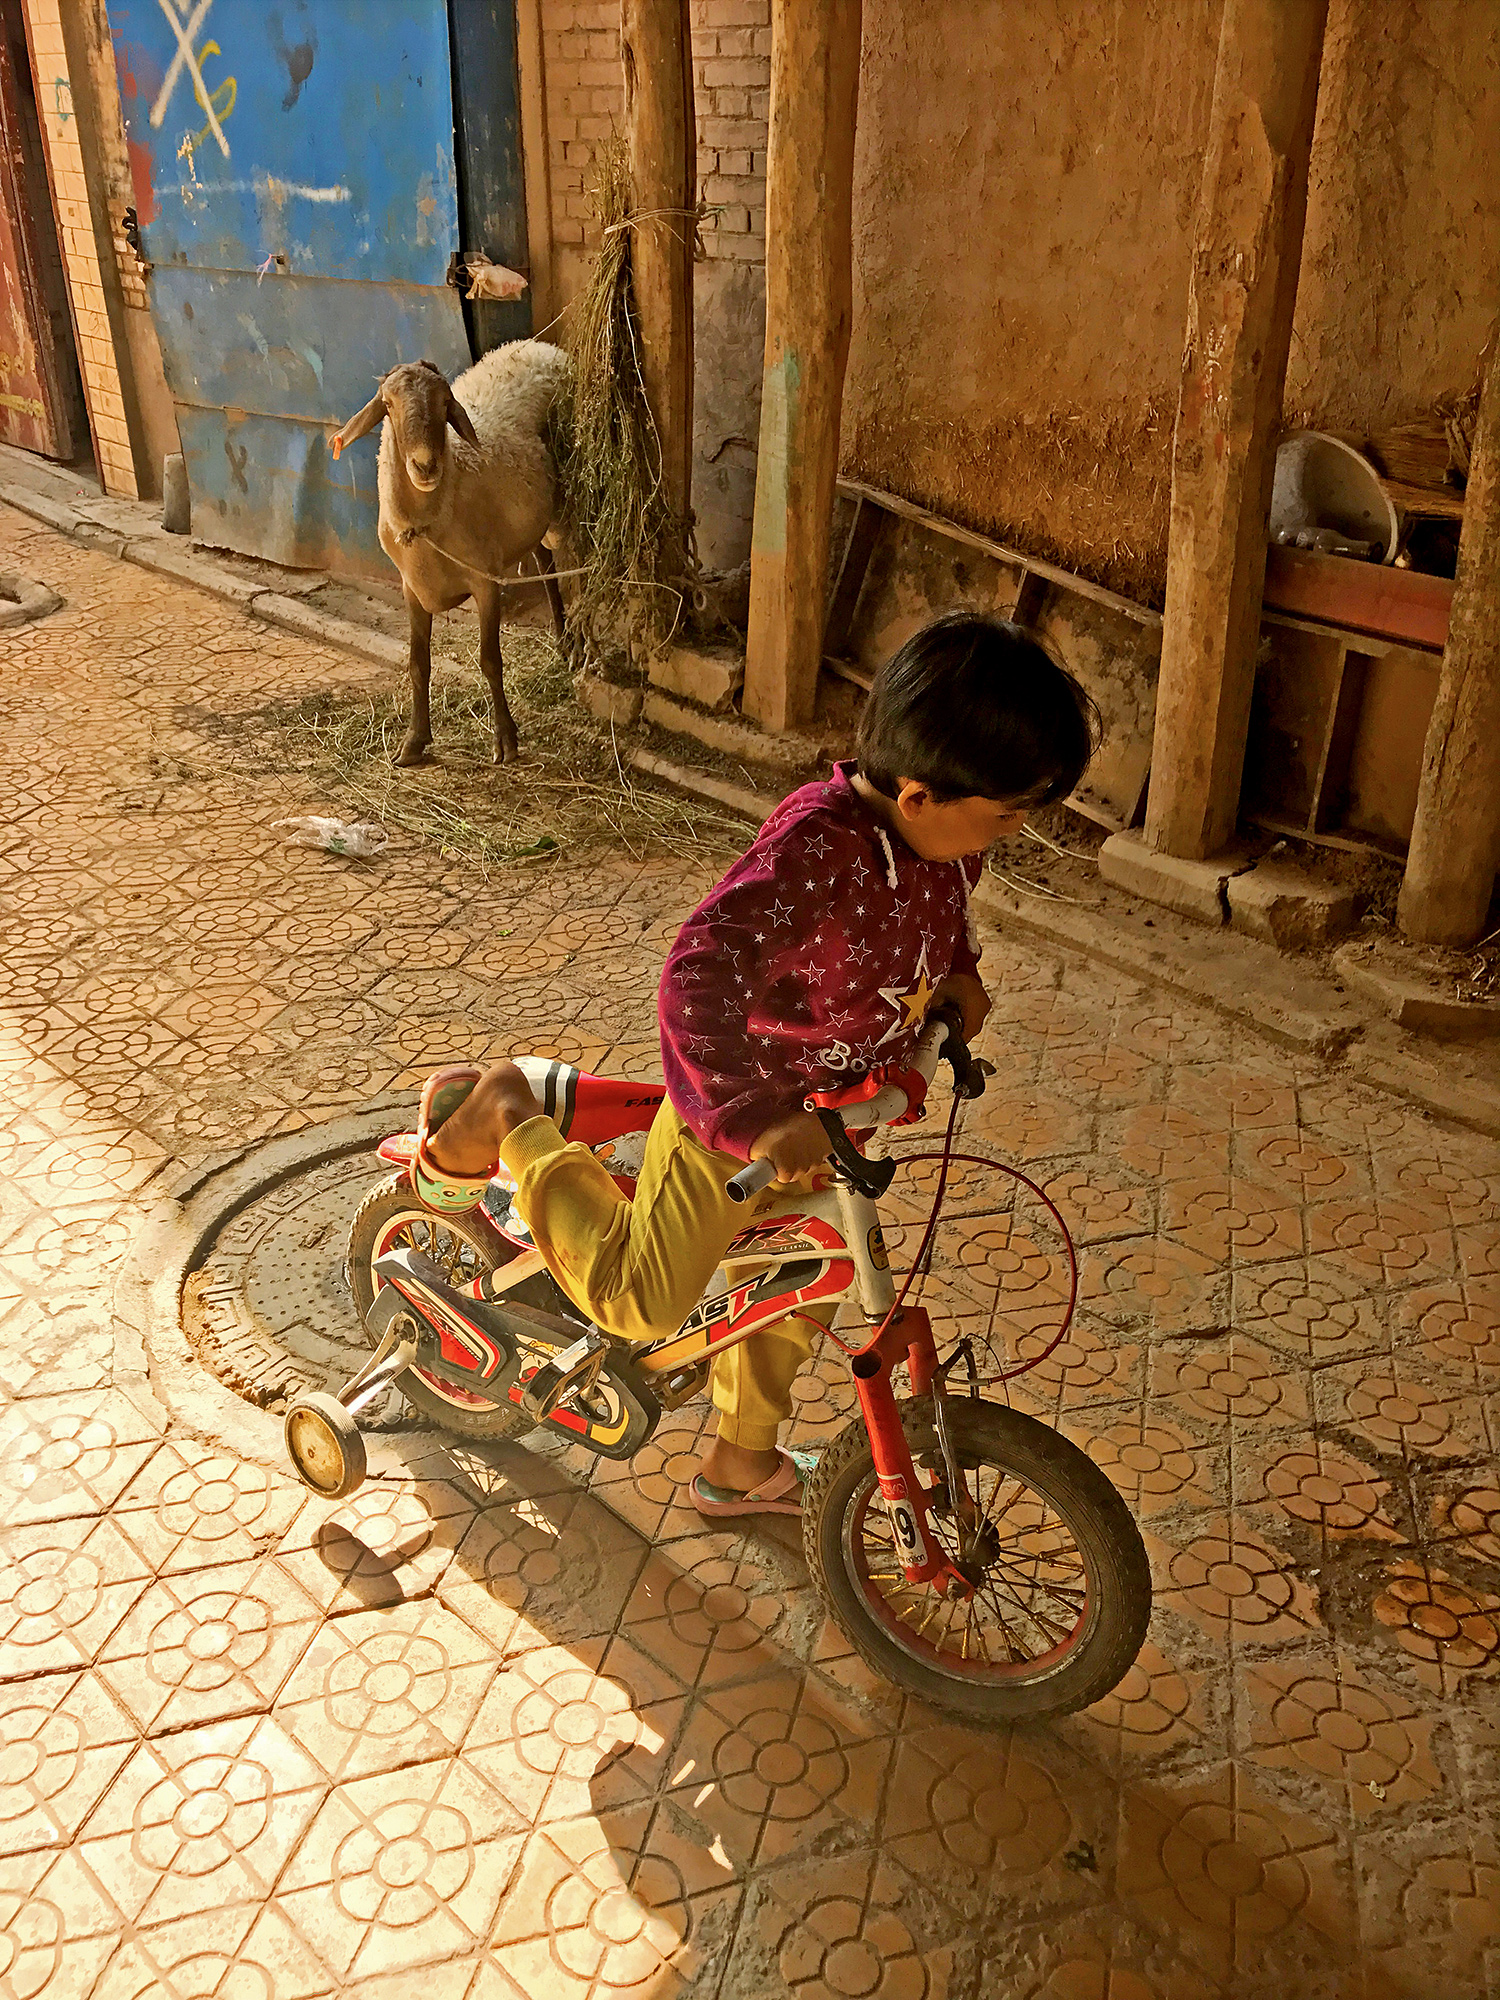 a child rides a bike with training wheels on a brick paved street while a goat watches from the side